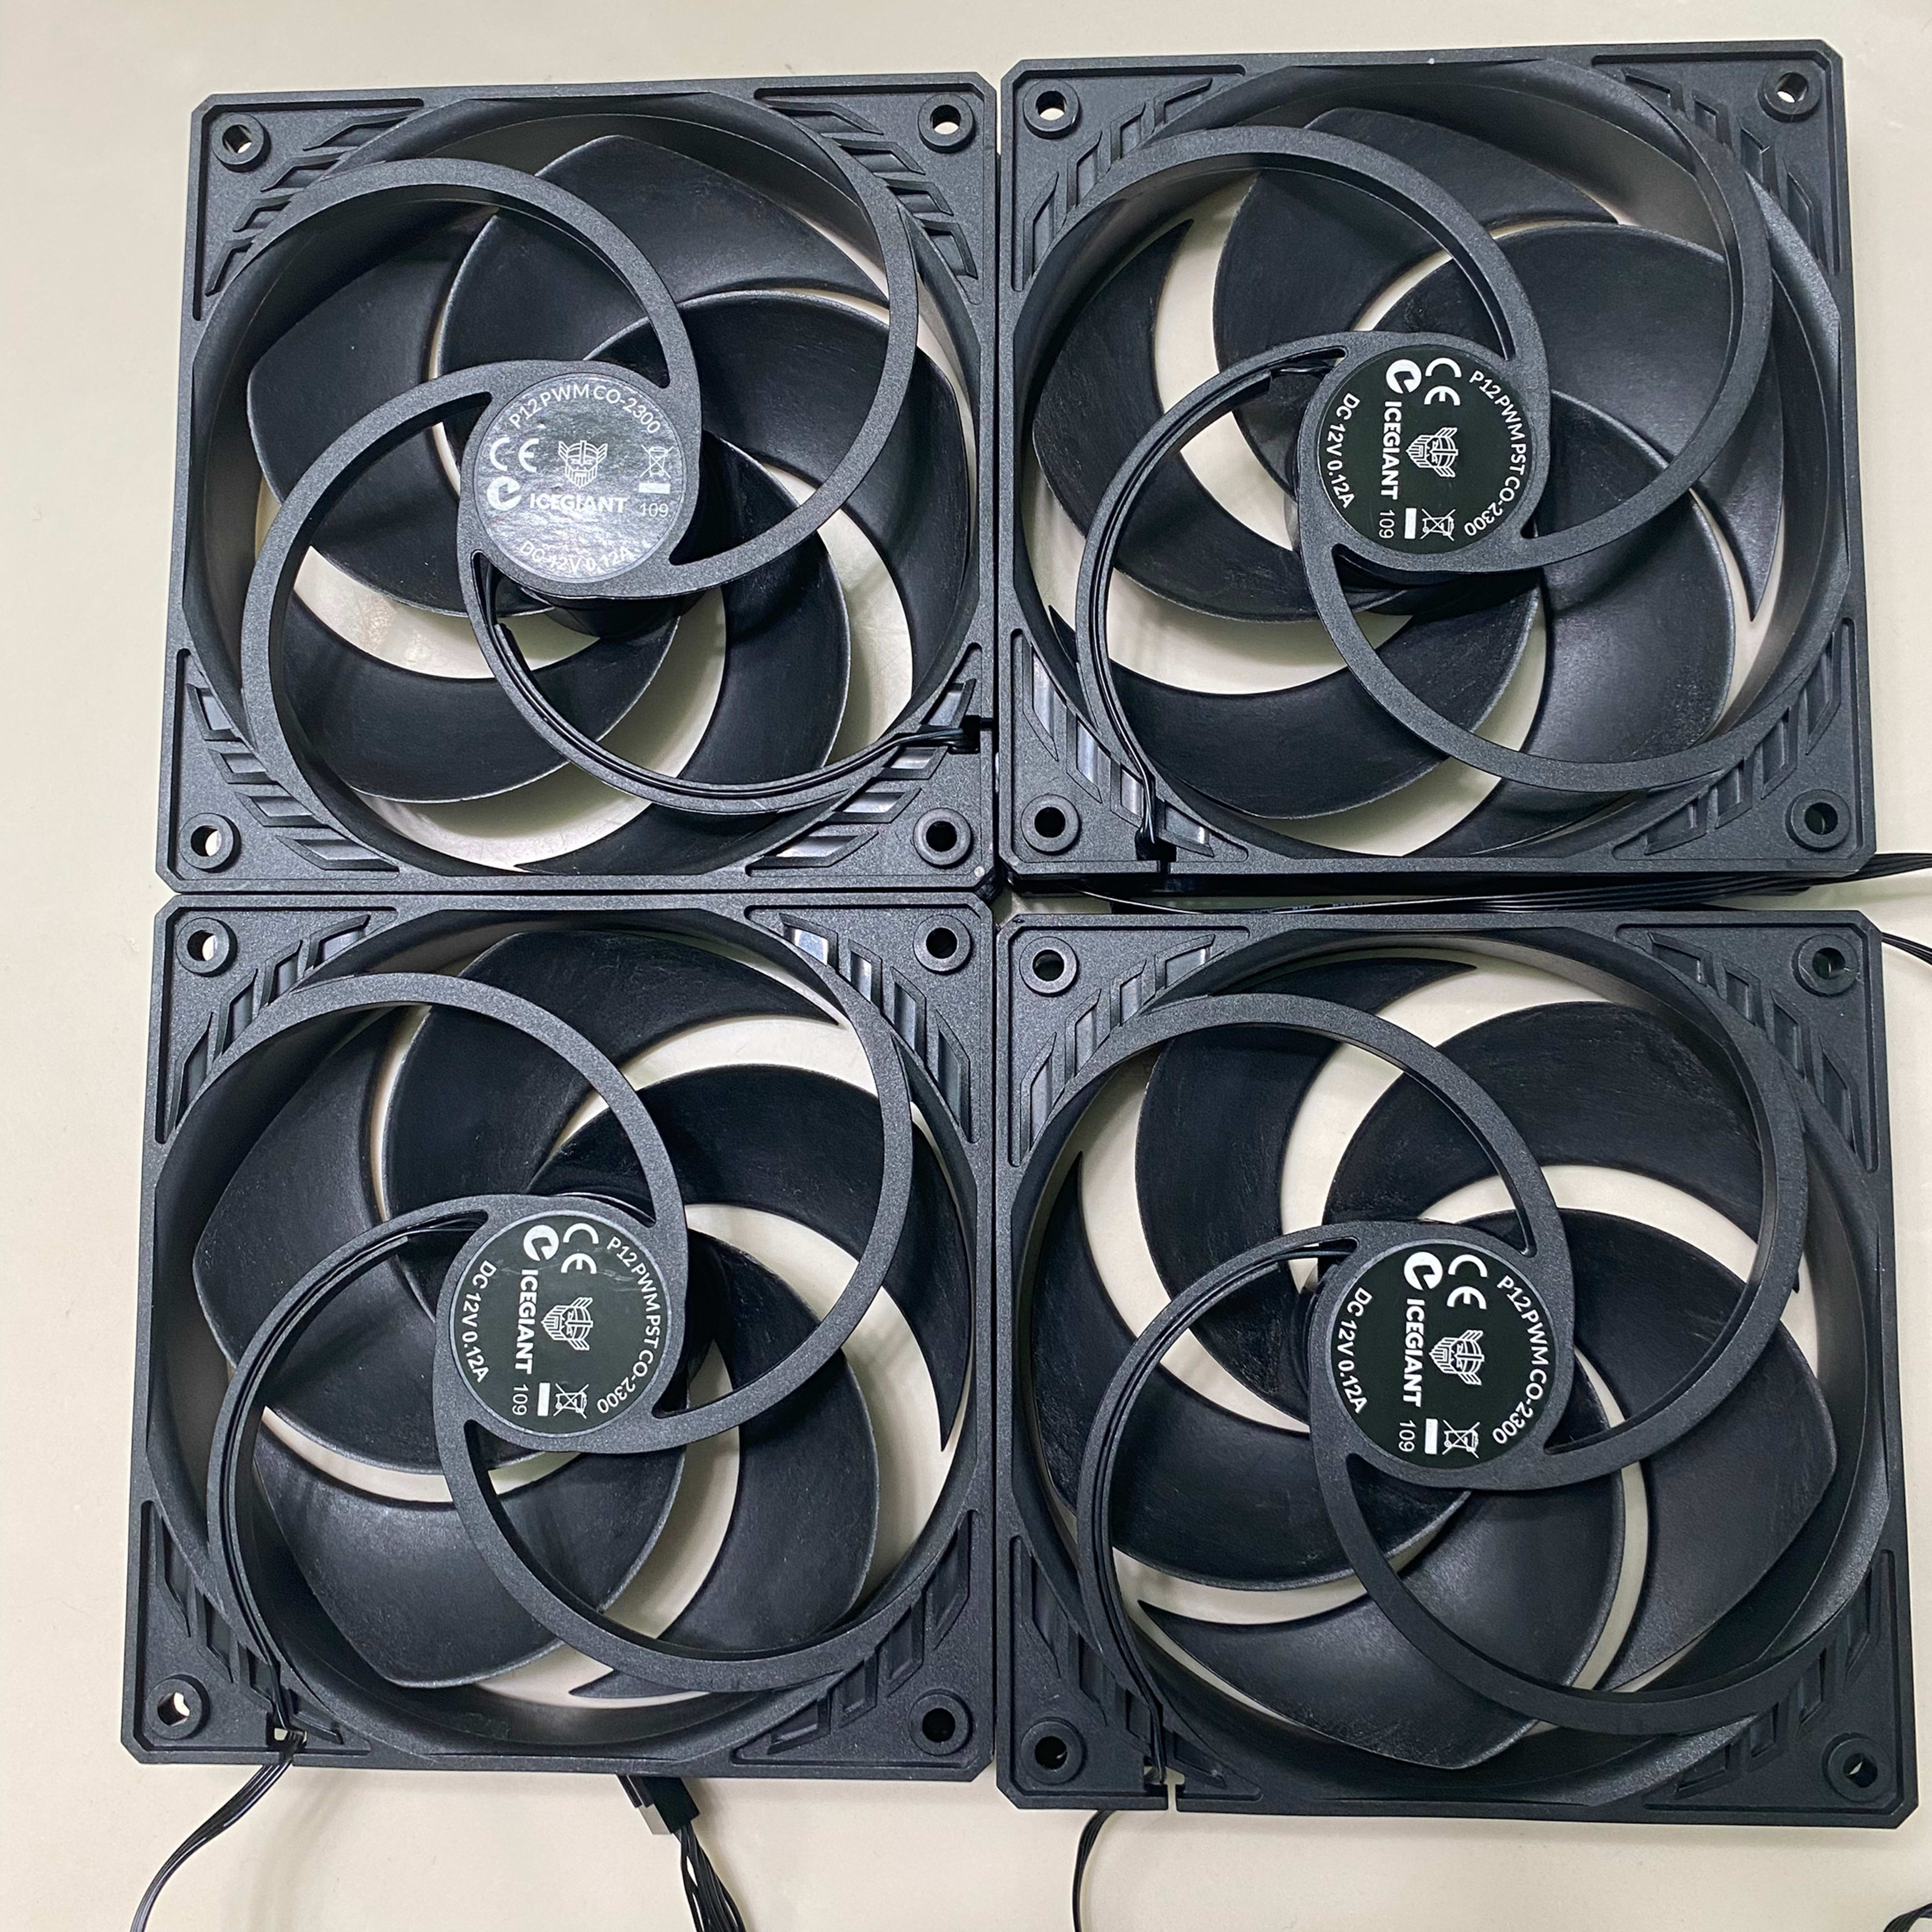 Ice Giant Modified Arctic P12 PWM Fans 120mm - 2300rpm - 4 PACK